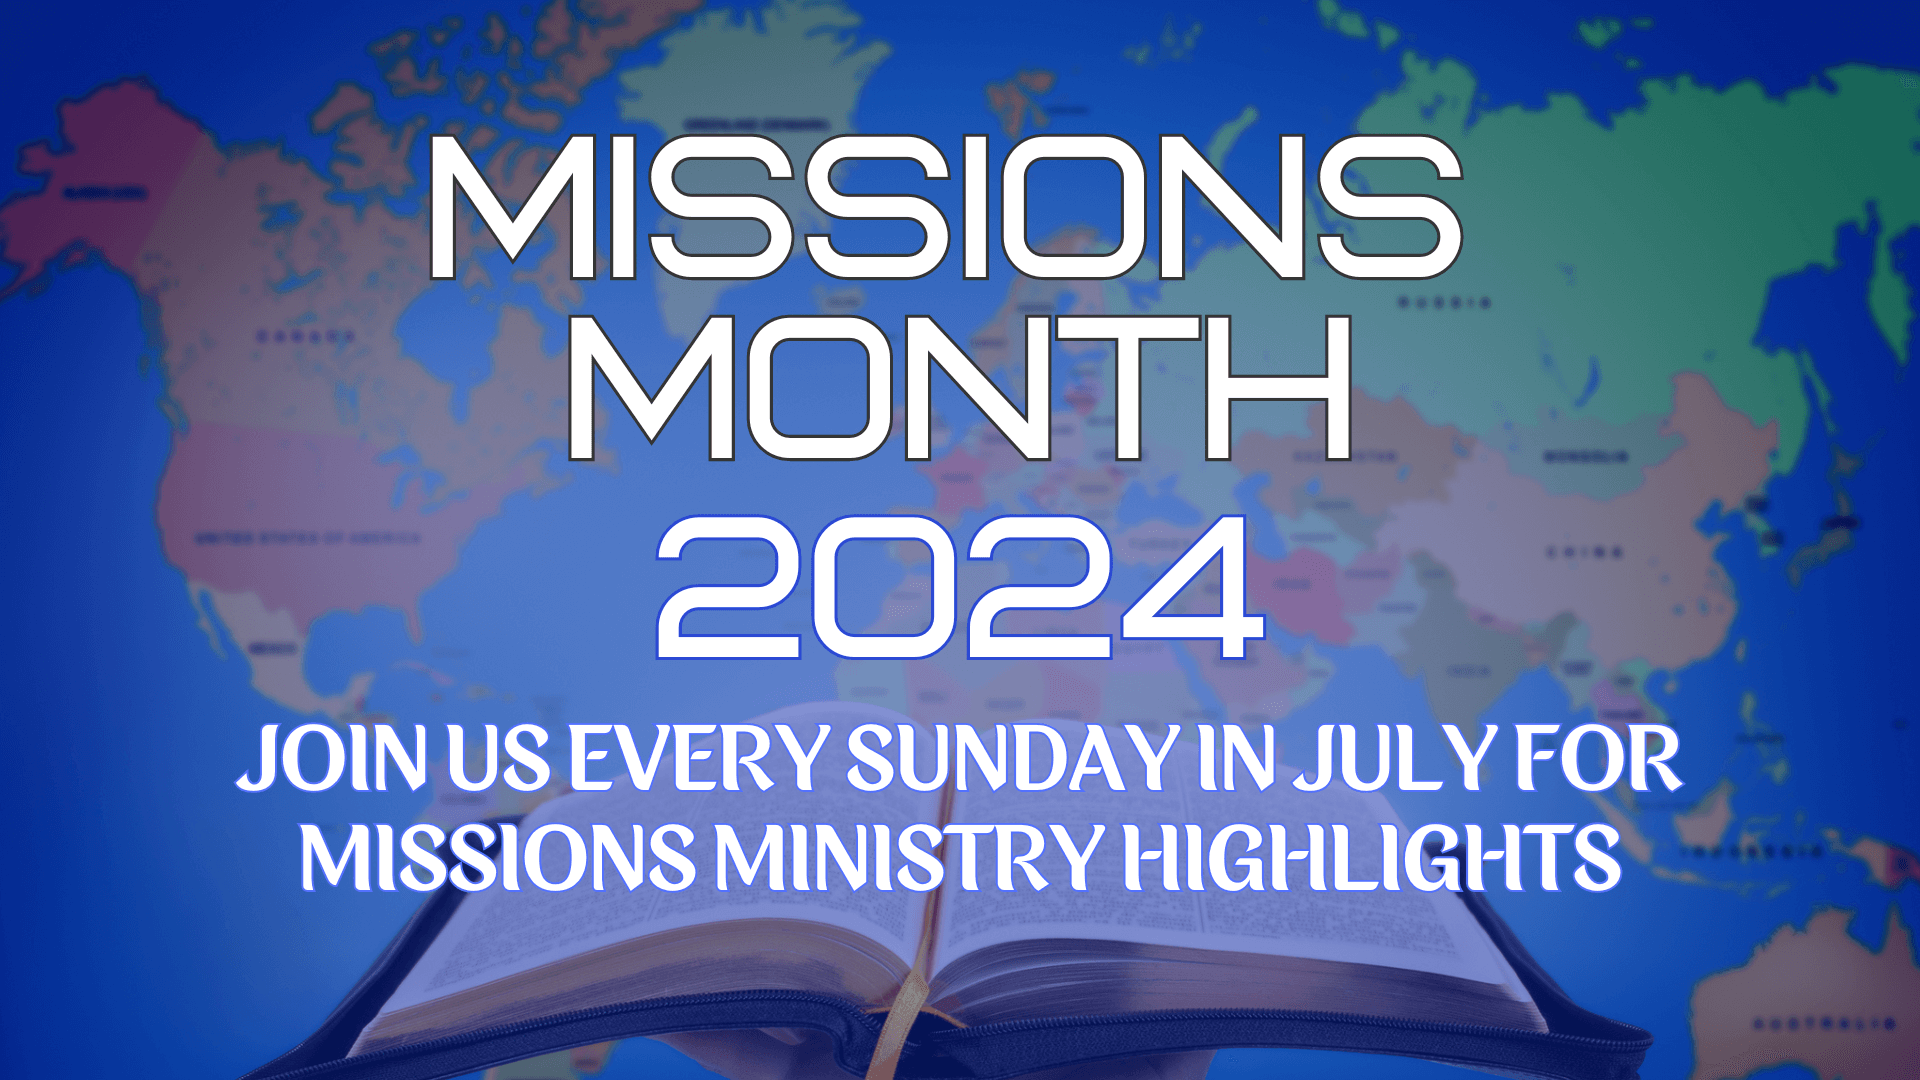 world map with bible at the bottom, overlayed with MIssions Month 2024, join us every sunday in July for missions ministry highlights